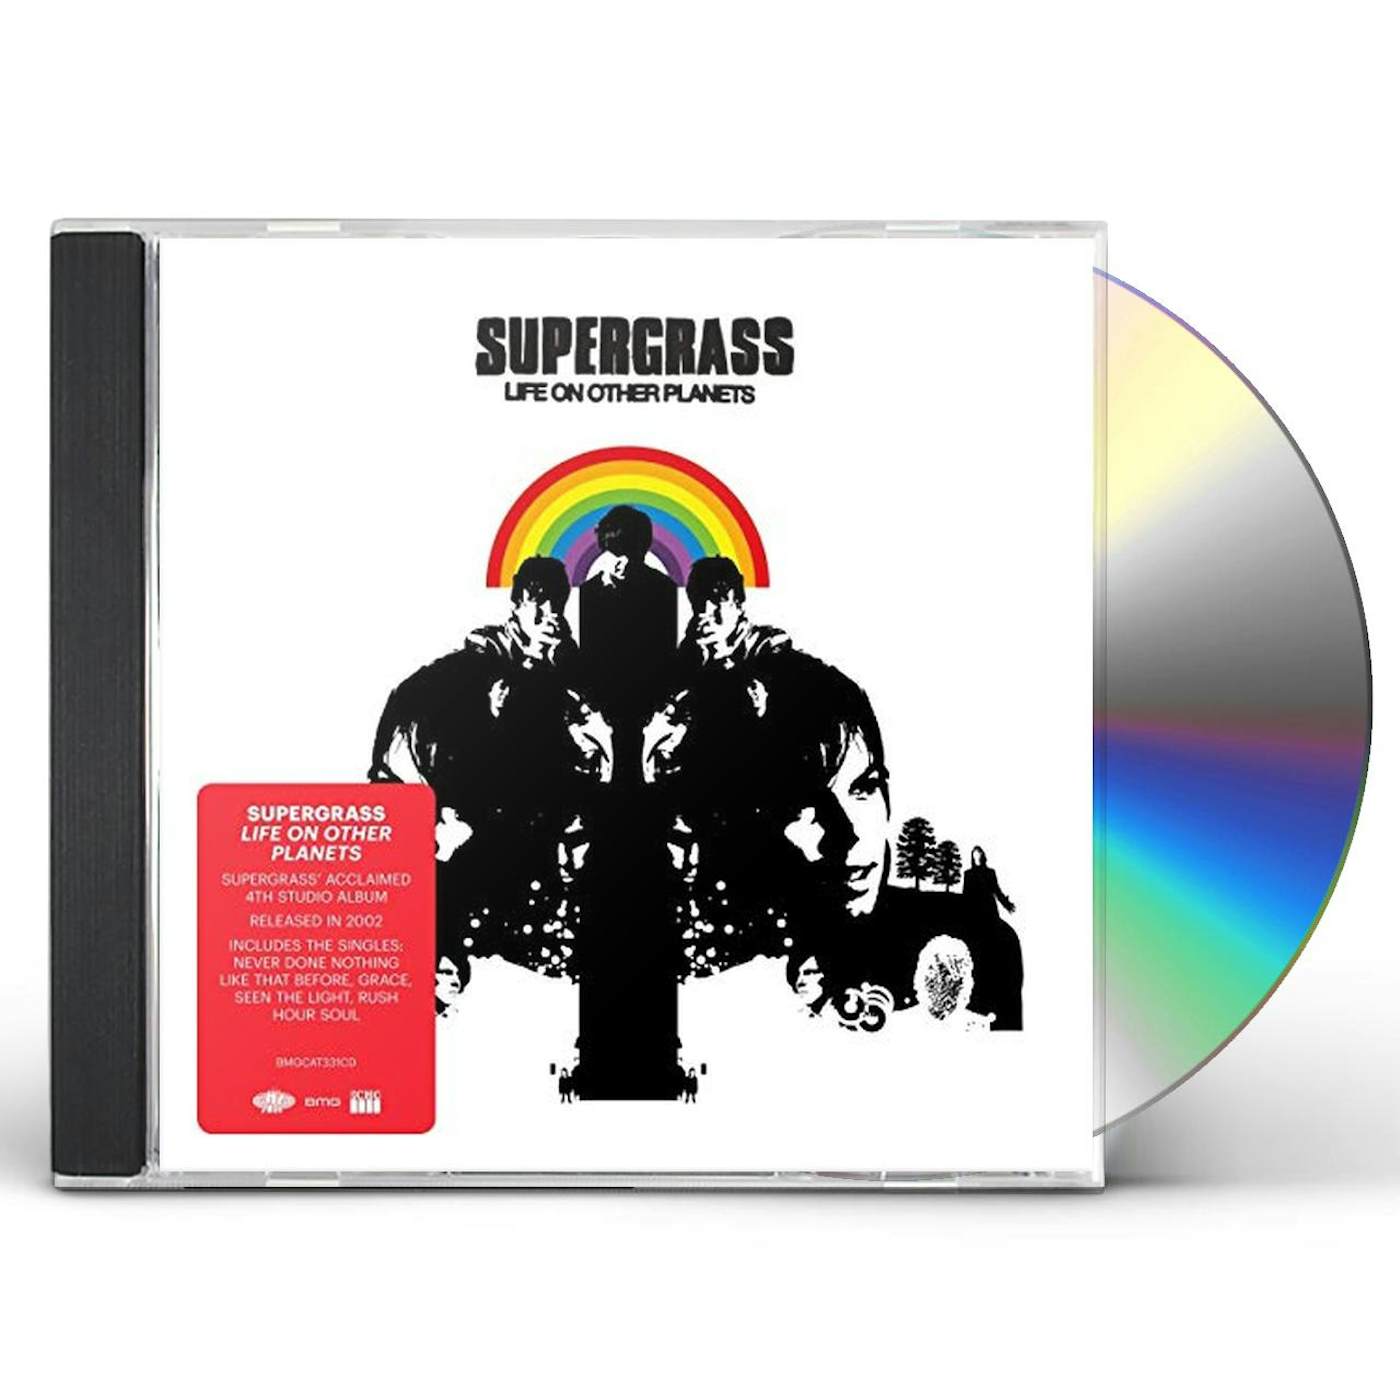 Supergrass LIFE ON OTHER PLANETS CD